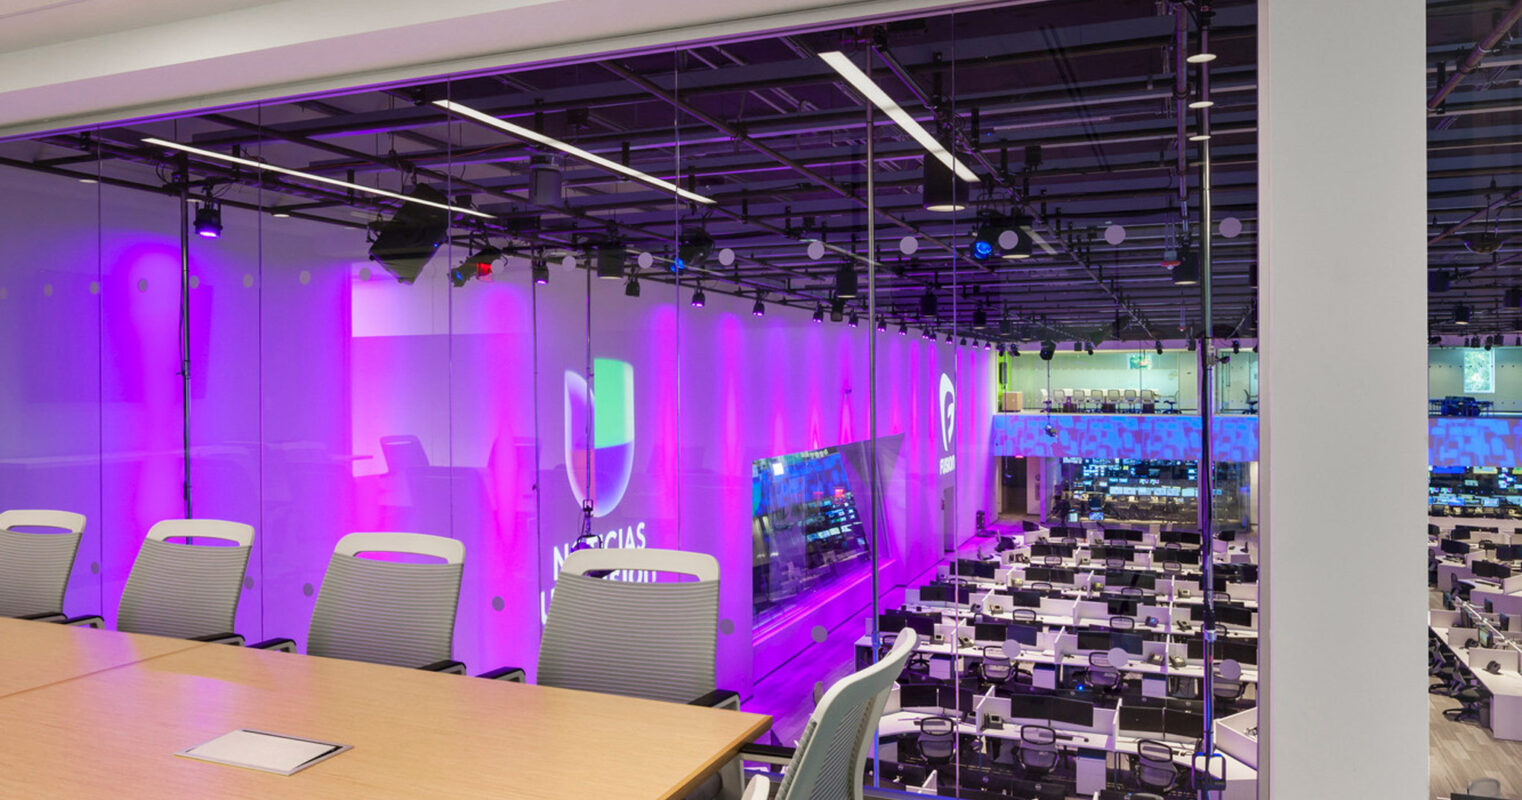 Modern office conference room with a clear glass wall overlooking a bustling open-plan workspace featuring ergonomic chairs and neatly arranged workstations. Vibrant purple LED lighting accents the adjacent media broadcasting room, showcasing contemporary corporate design with a focus on functionality and brand identity.